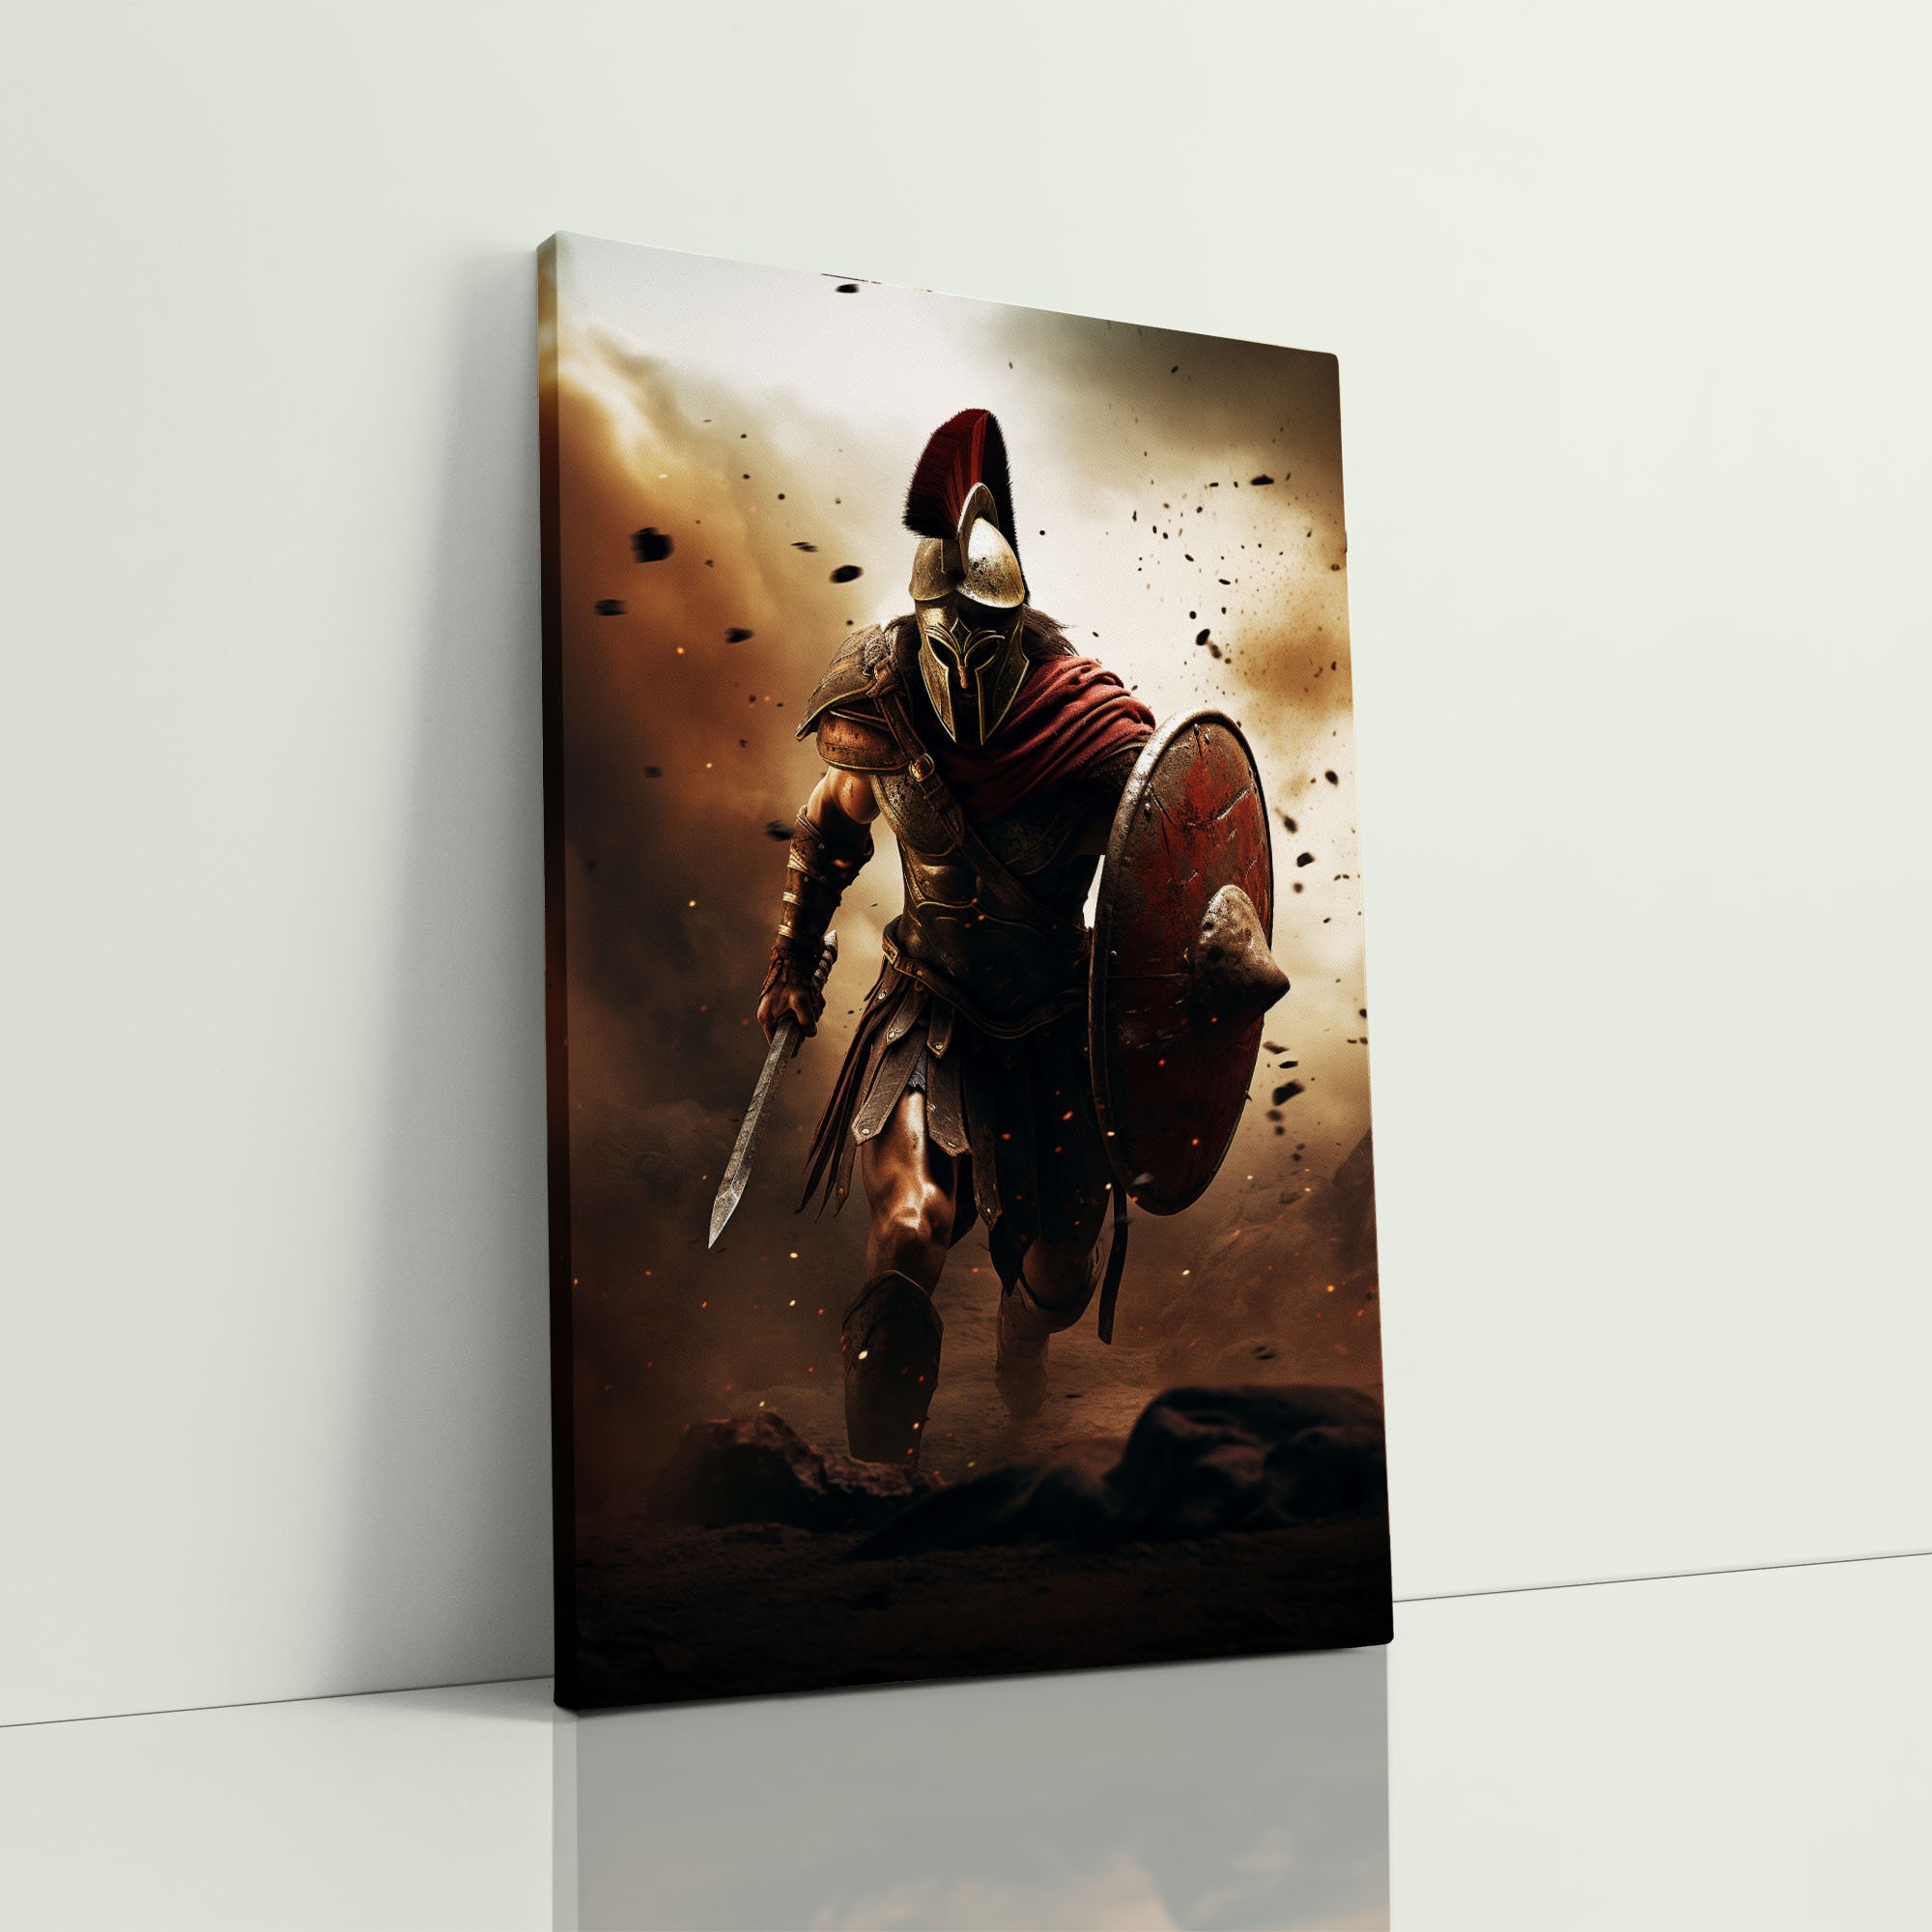 This Is Spartan | Poster